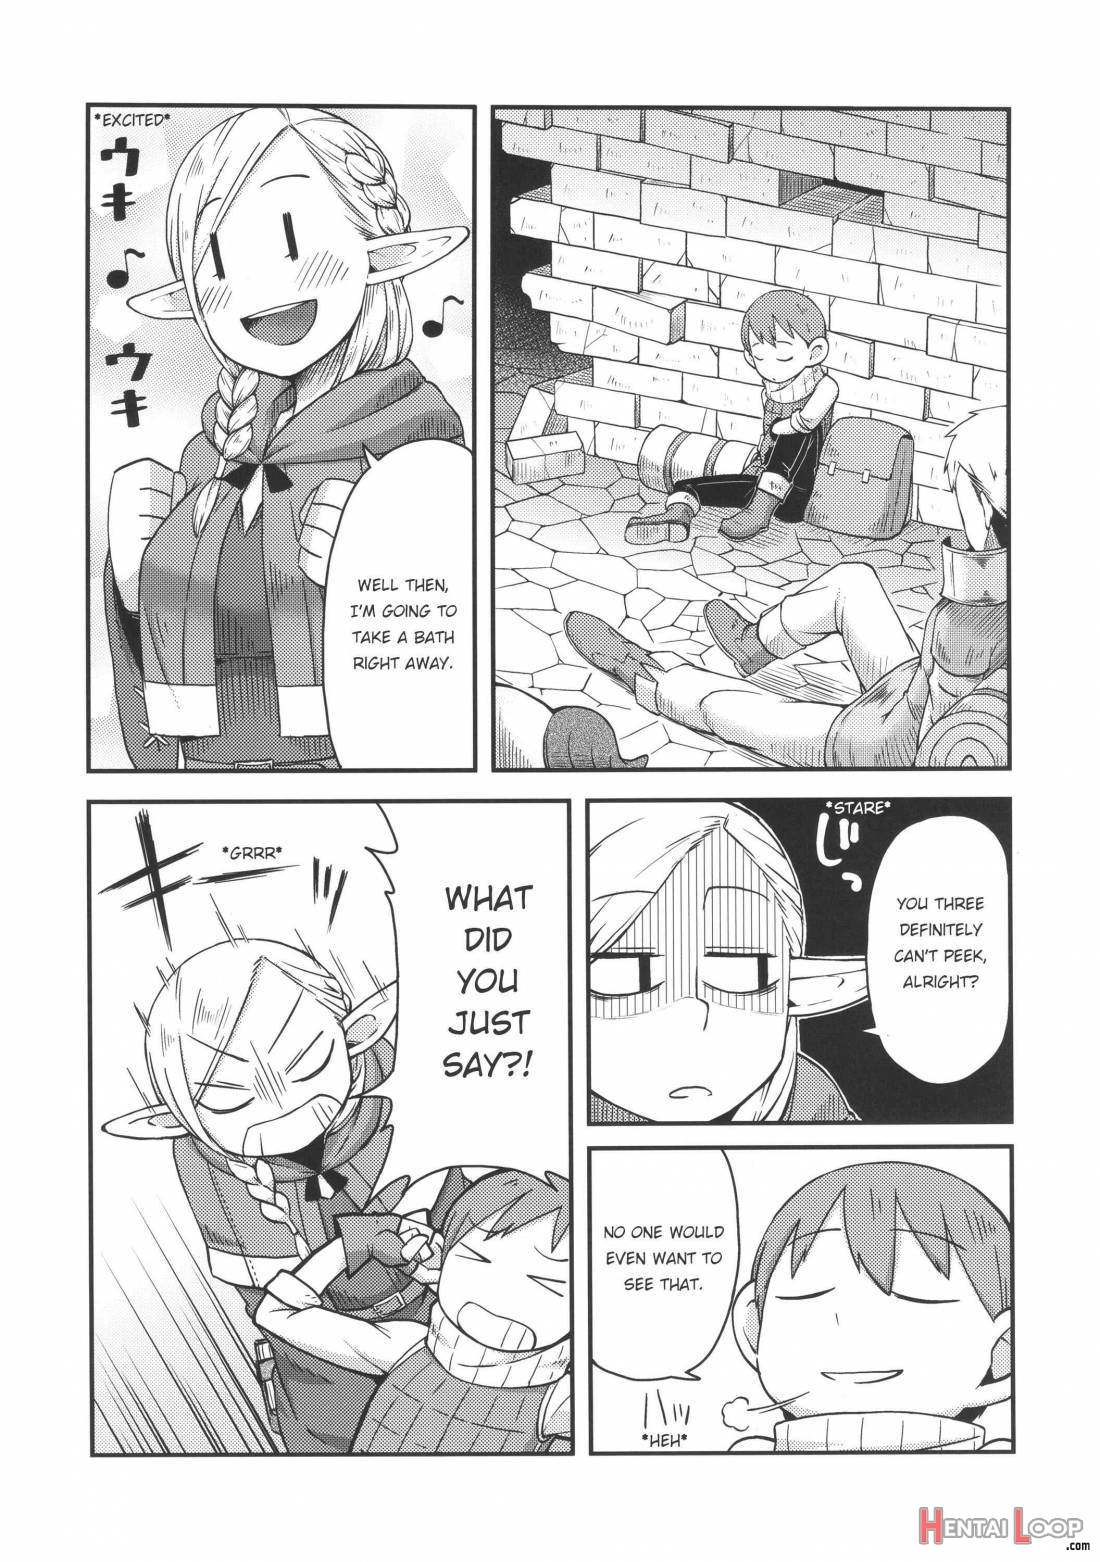 Dungeon Cooking ~Marcille no Slime Zoe~ page 6